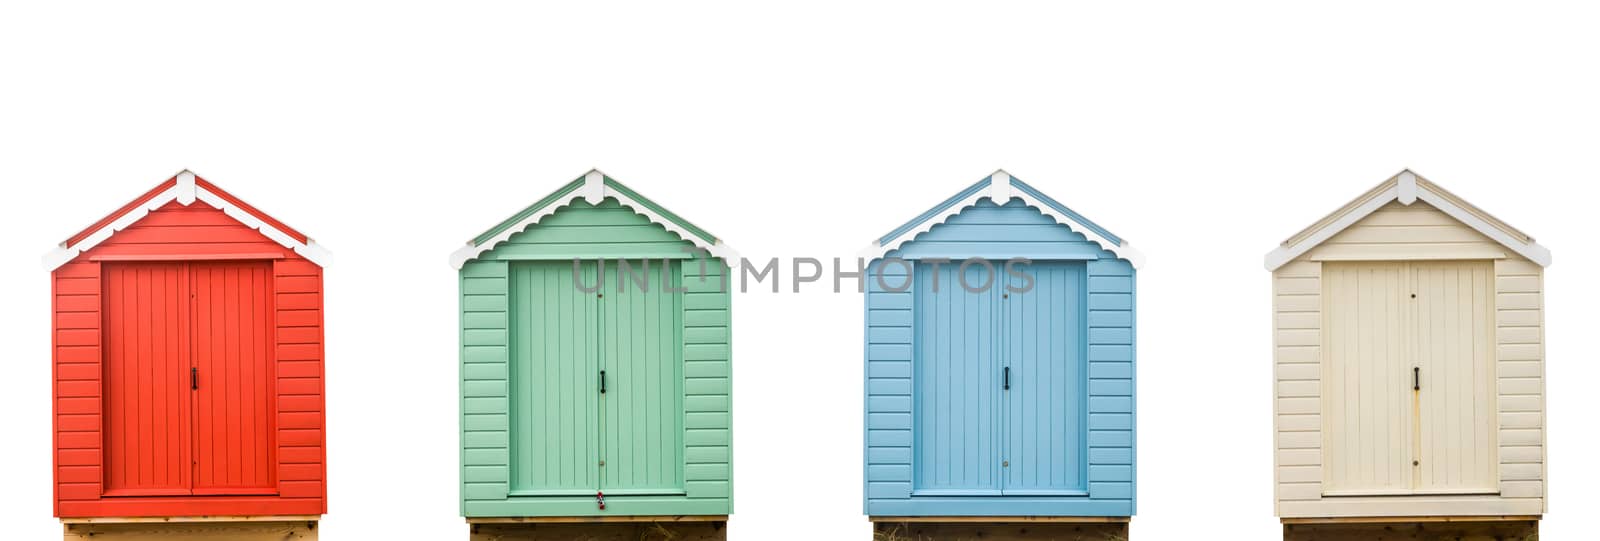 Four Isolated, Colorful Vintage Retro British Beach Huts